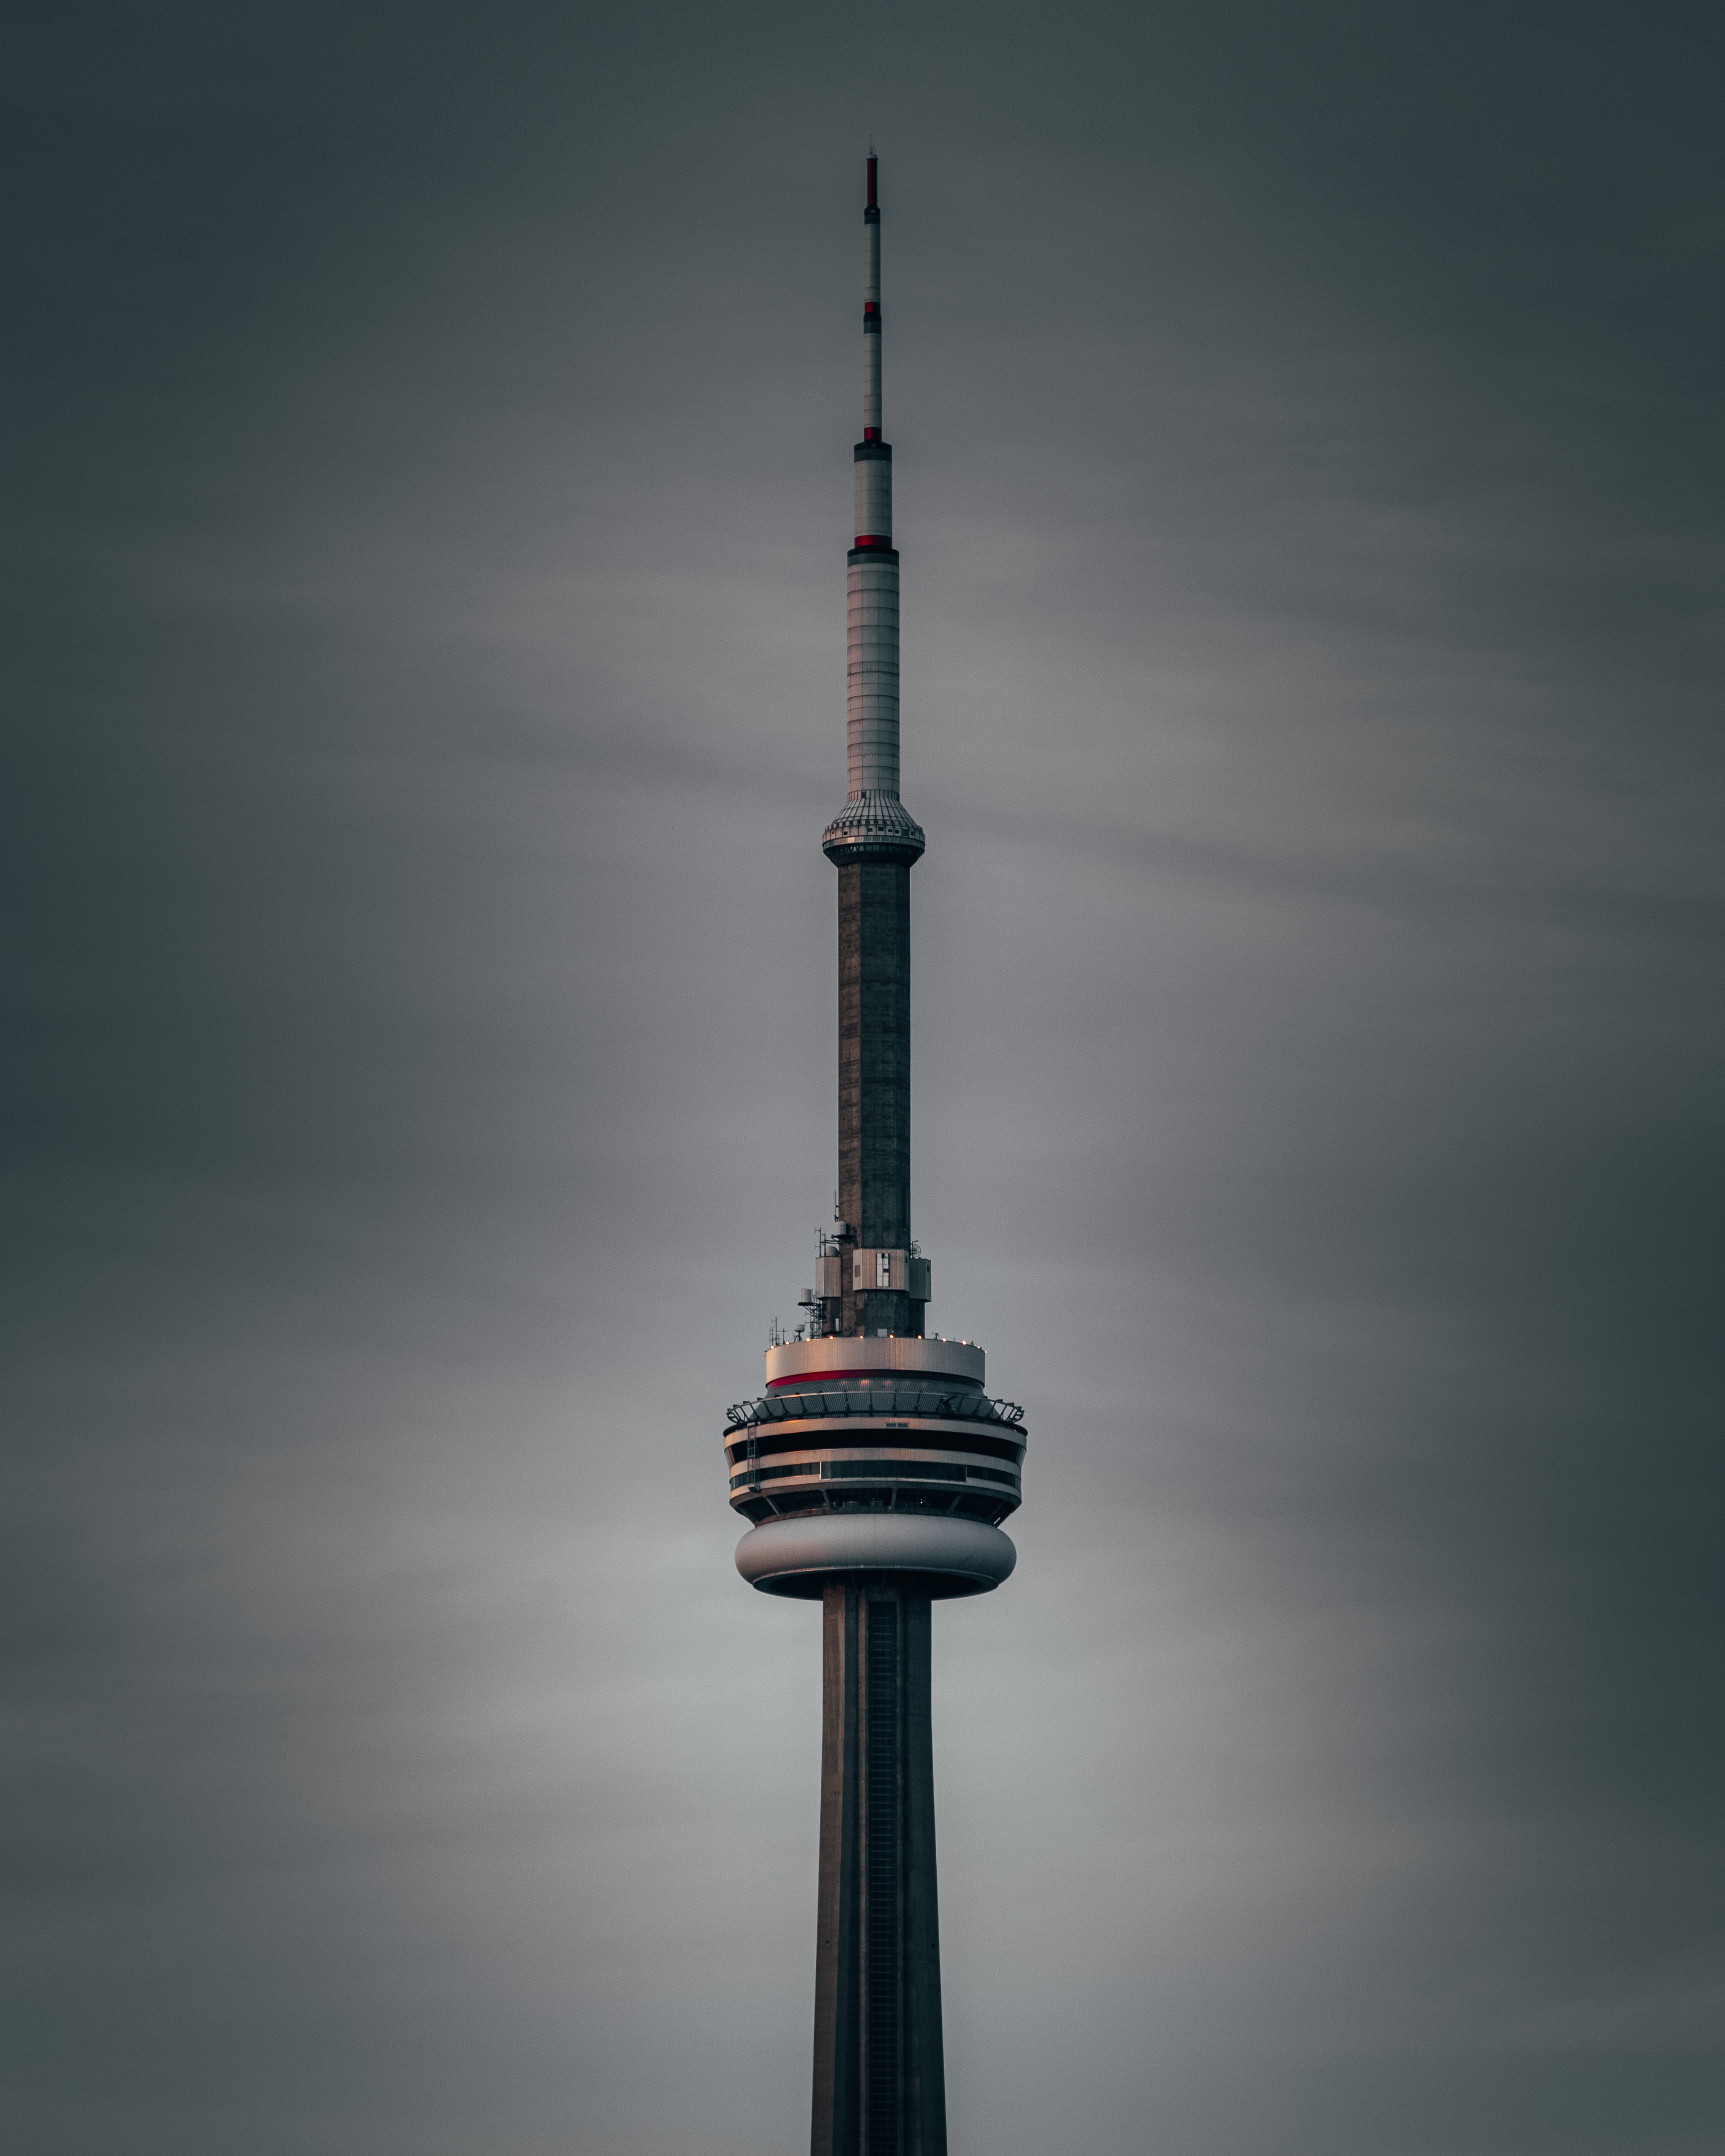 89847 Screensavers and Wallpapers Architecture for phone. Download architecture, building, canada, miscellanea, miscellaneous, tower, modern, up to date, toronto pictures for free